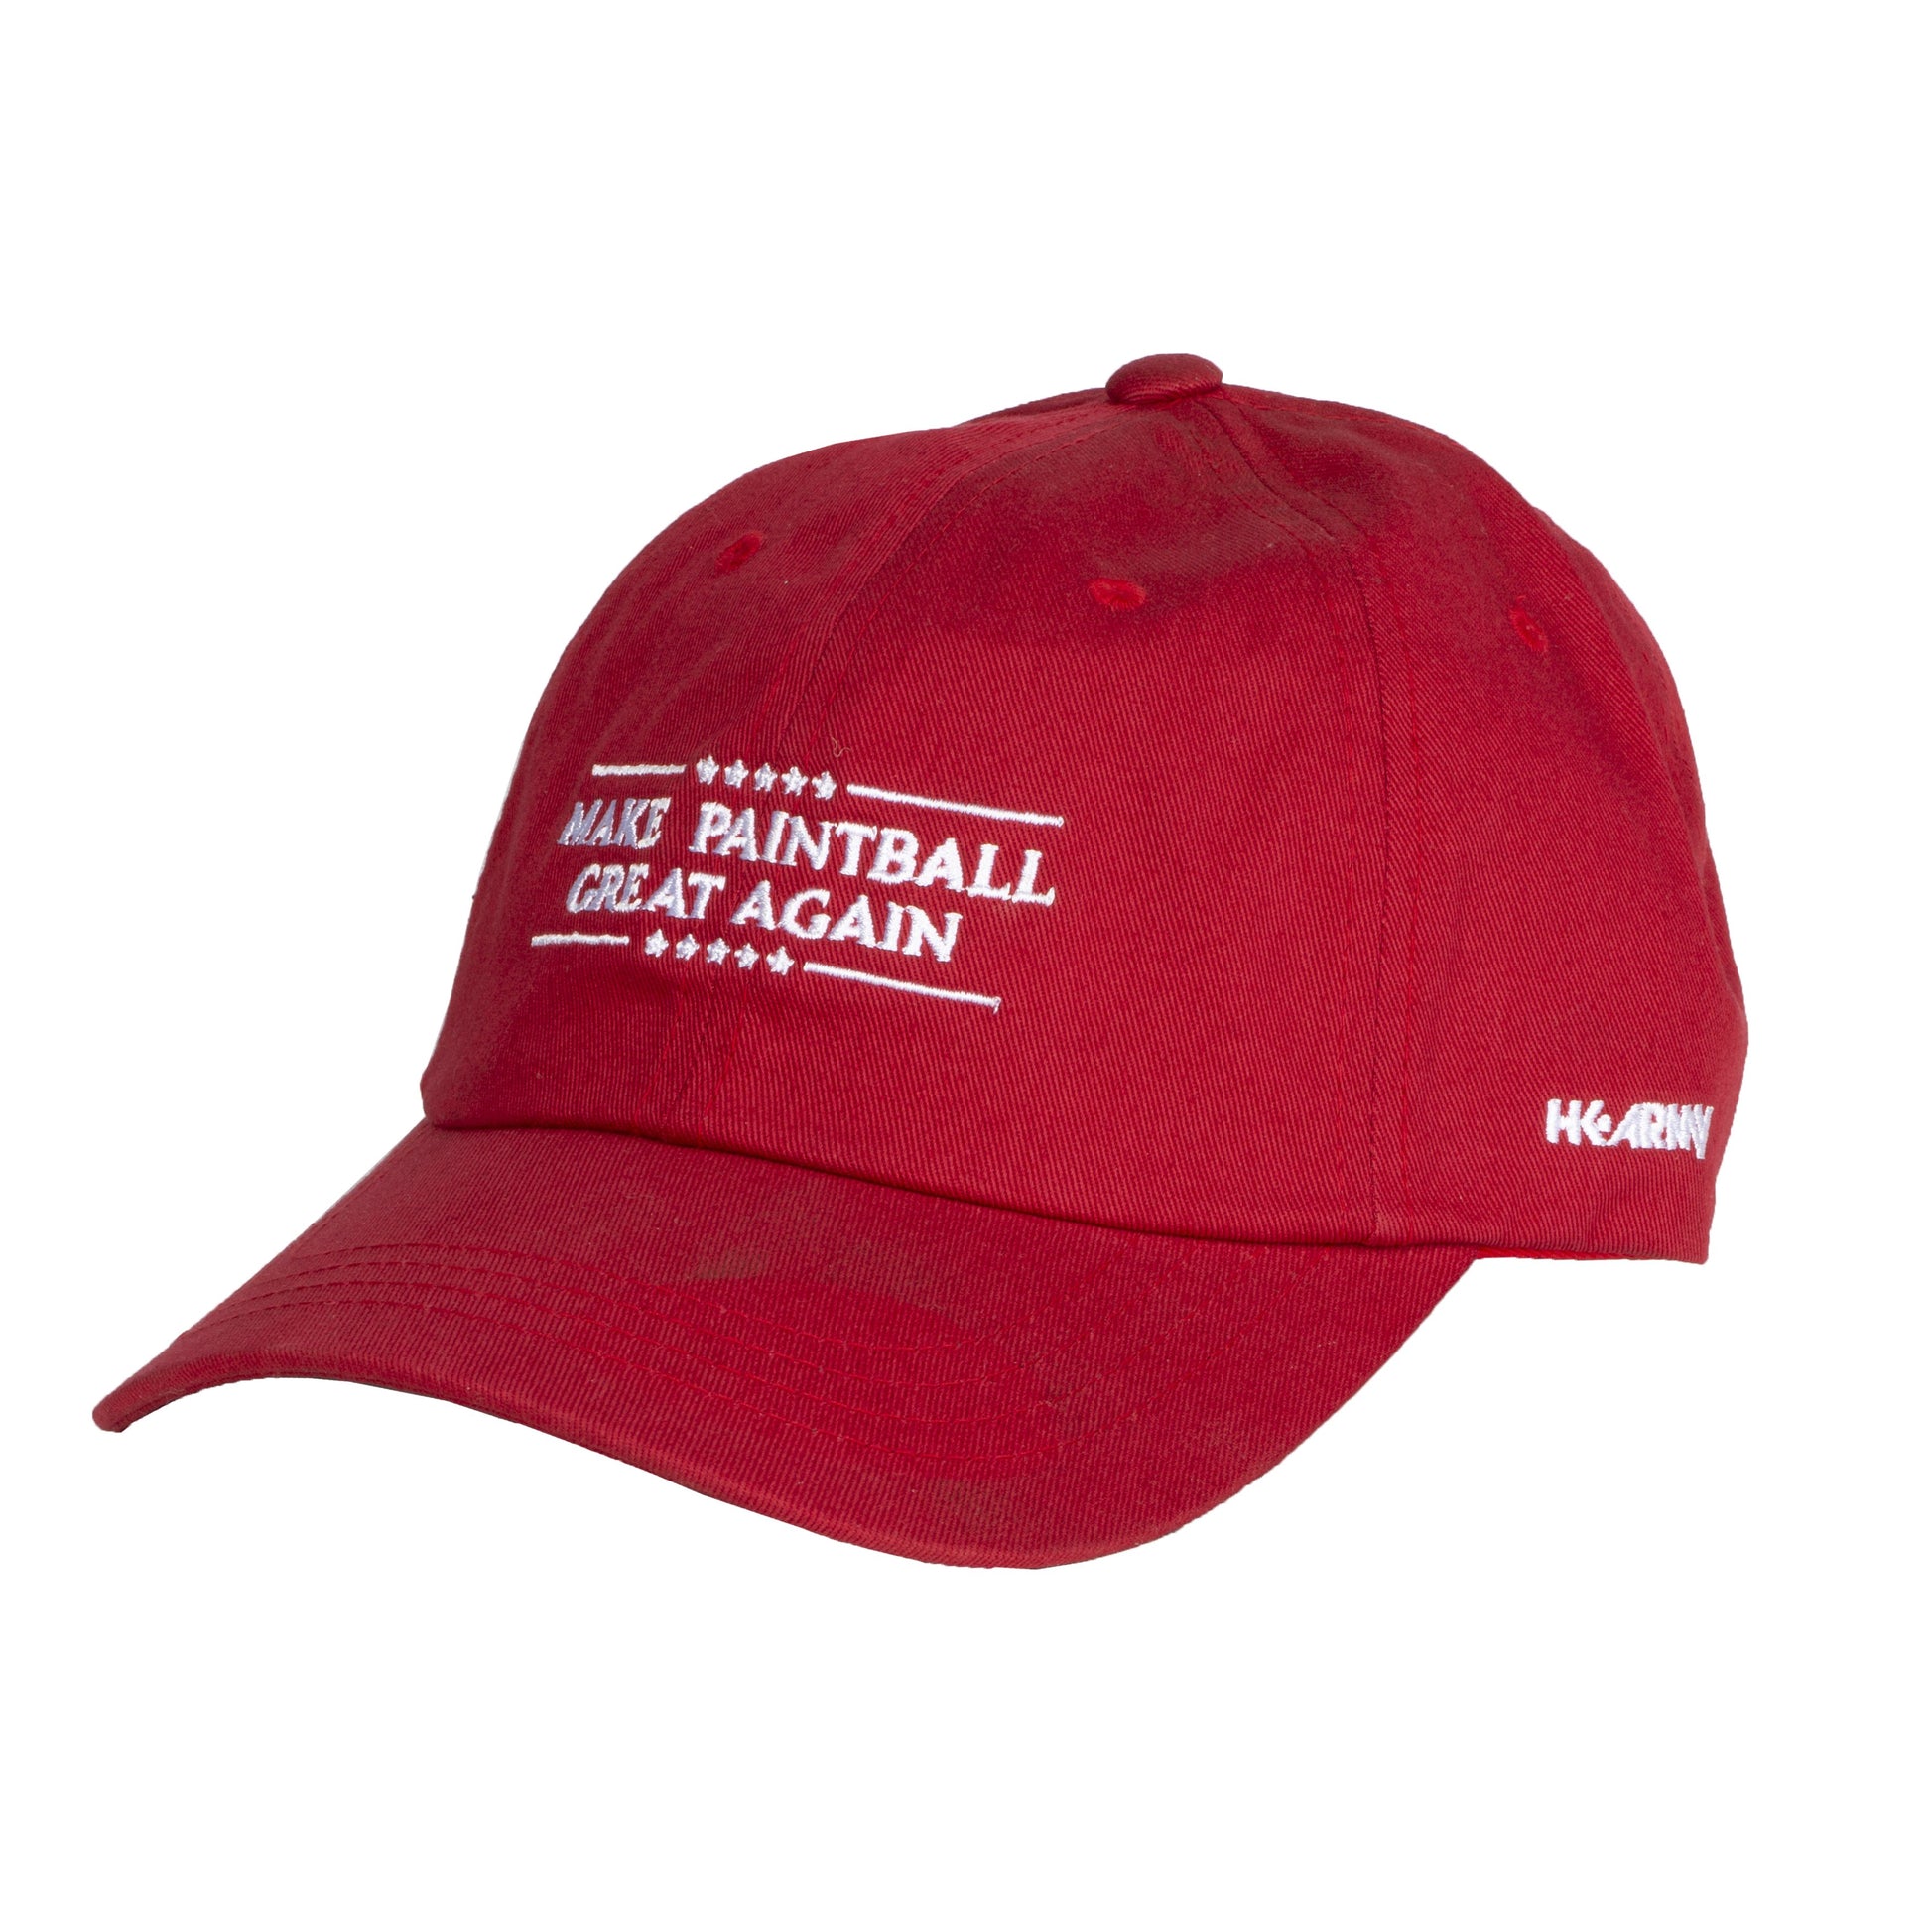 HK Army - Dad Hat - Make Paintball Great Again - Red - HK Army